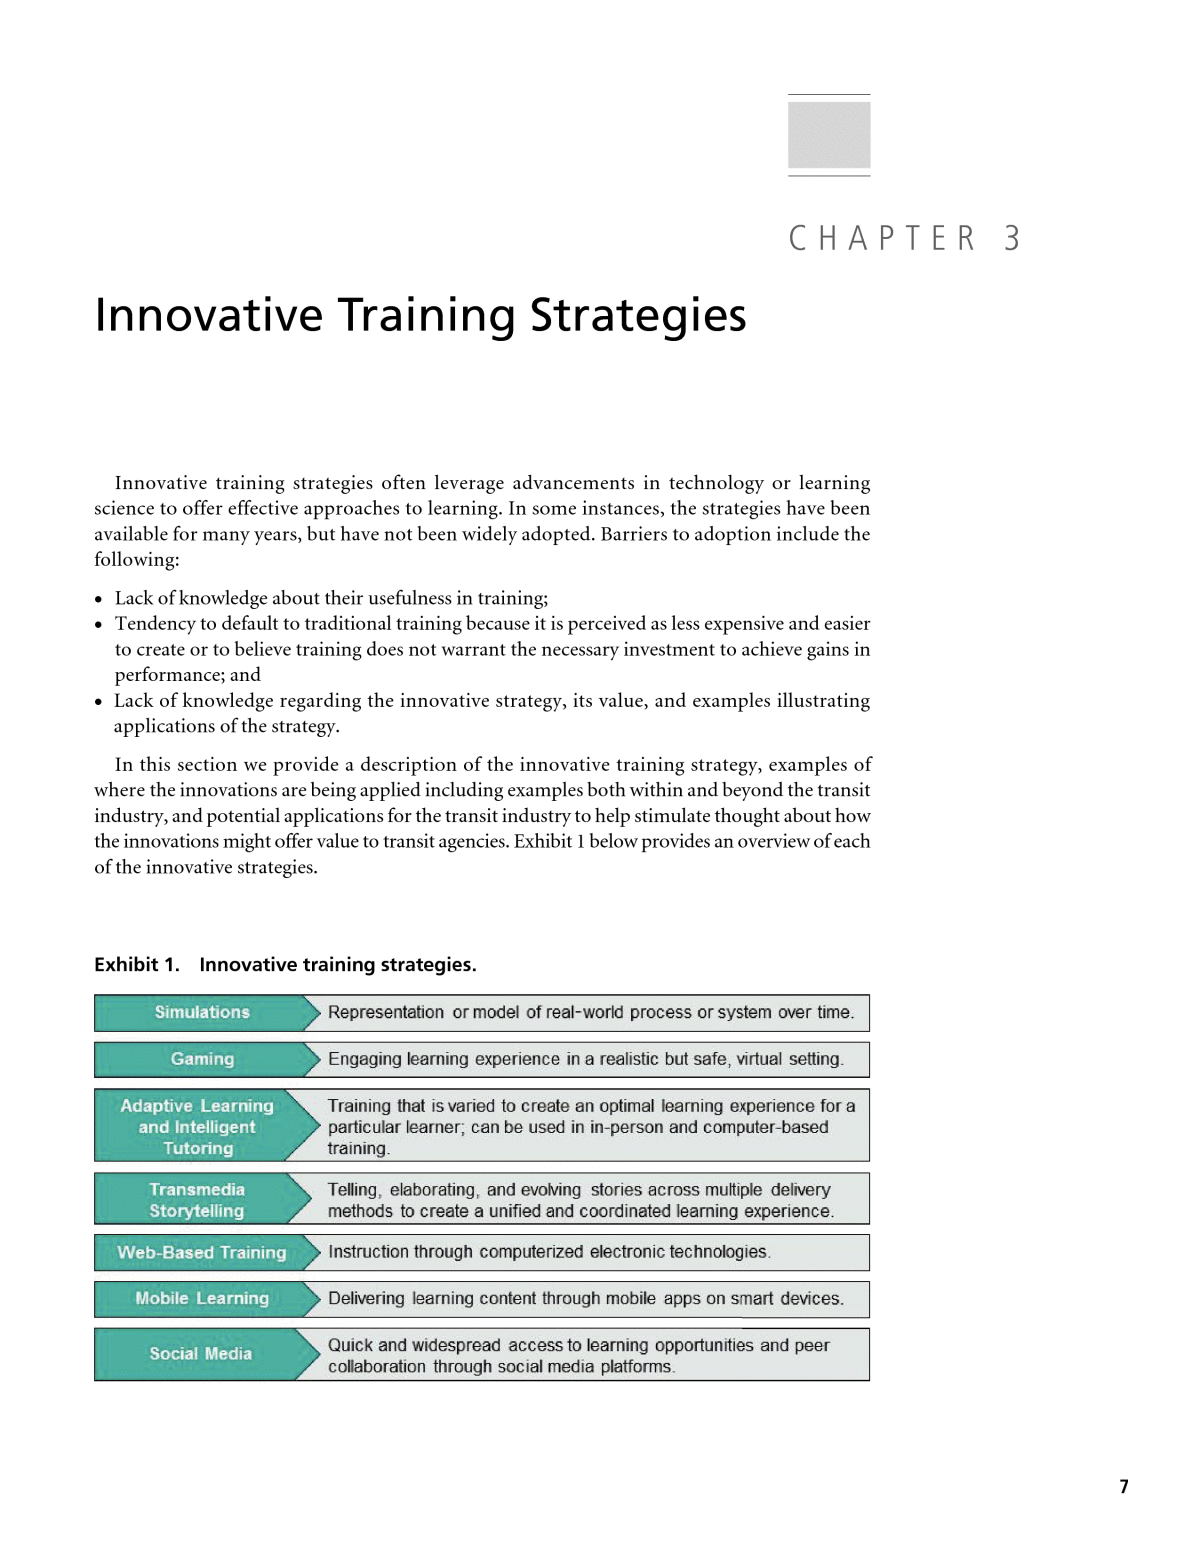 Chapter 3 - Innovative Training Strategies, Transit Technical Training,  Volume 1: Guide to Applying Best Practices and Sharing Resources